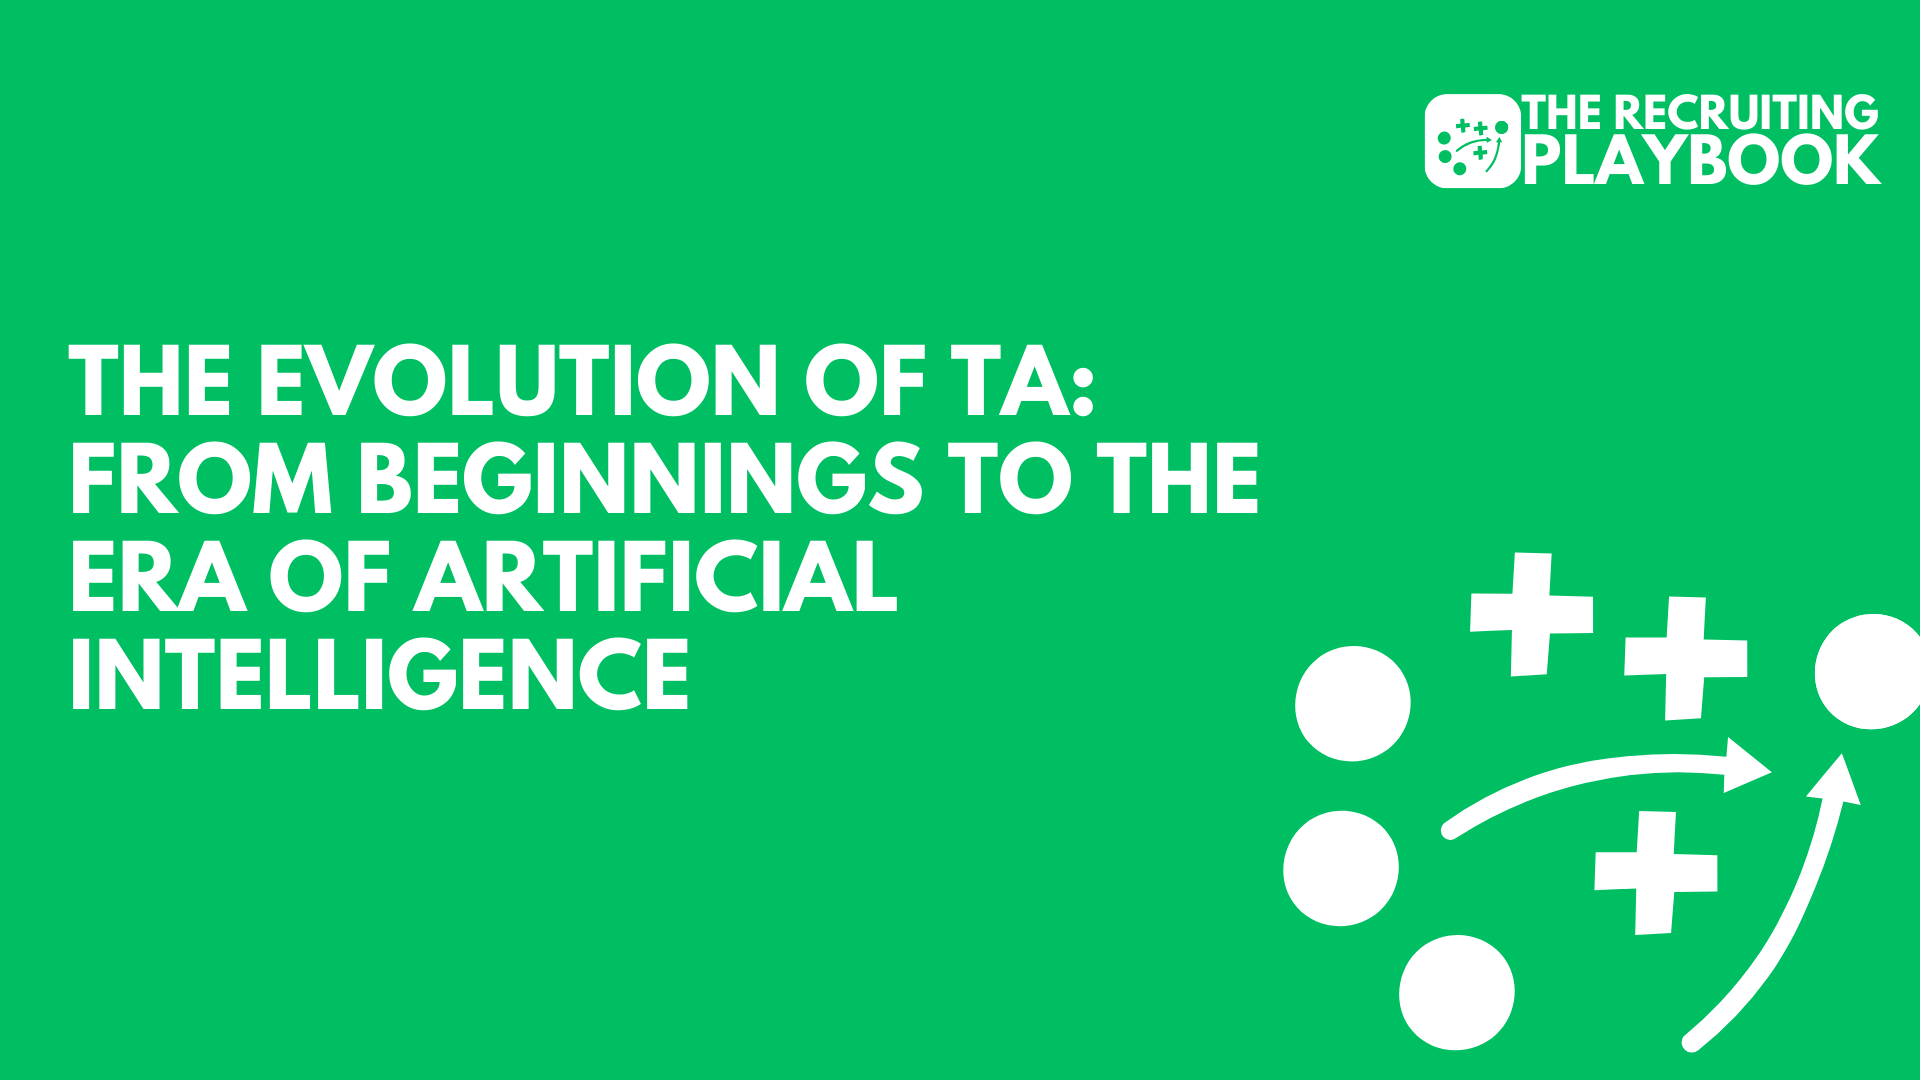 The Evolution of TA: From Beginnings to the Era of Artificial Intelligence